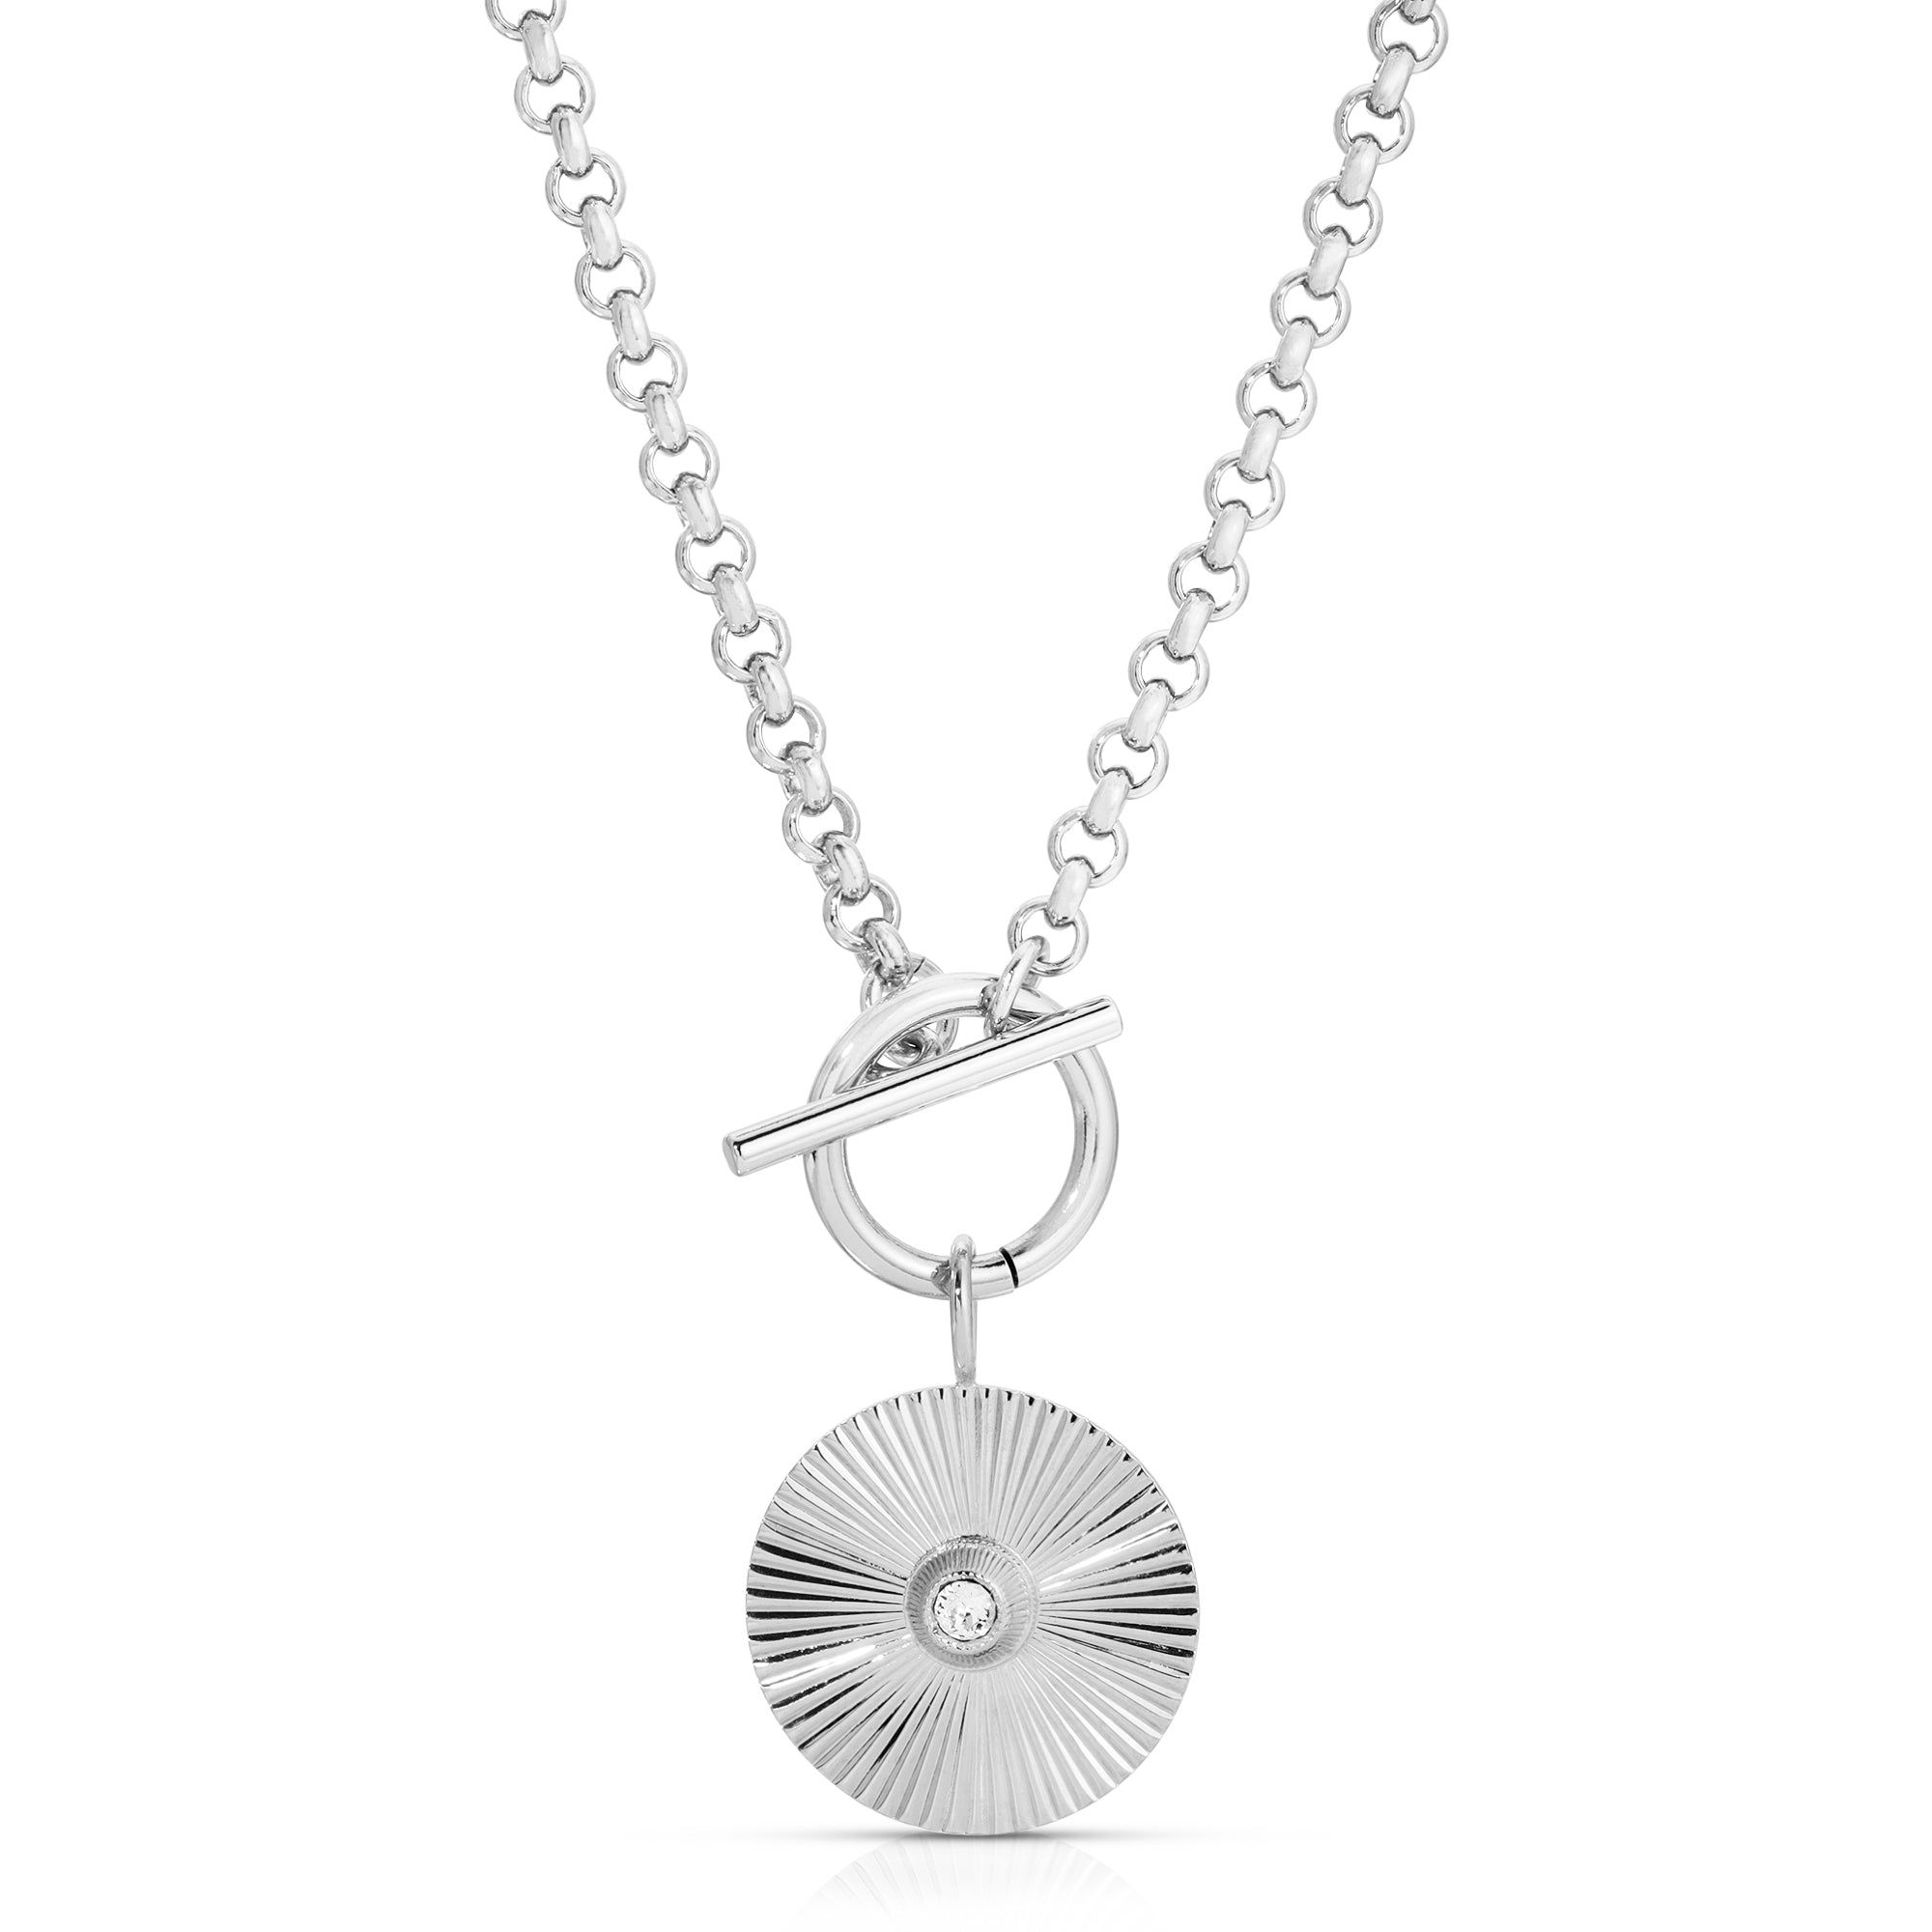 a silver necklace with a circular pendant on a chain